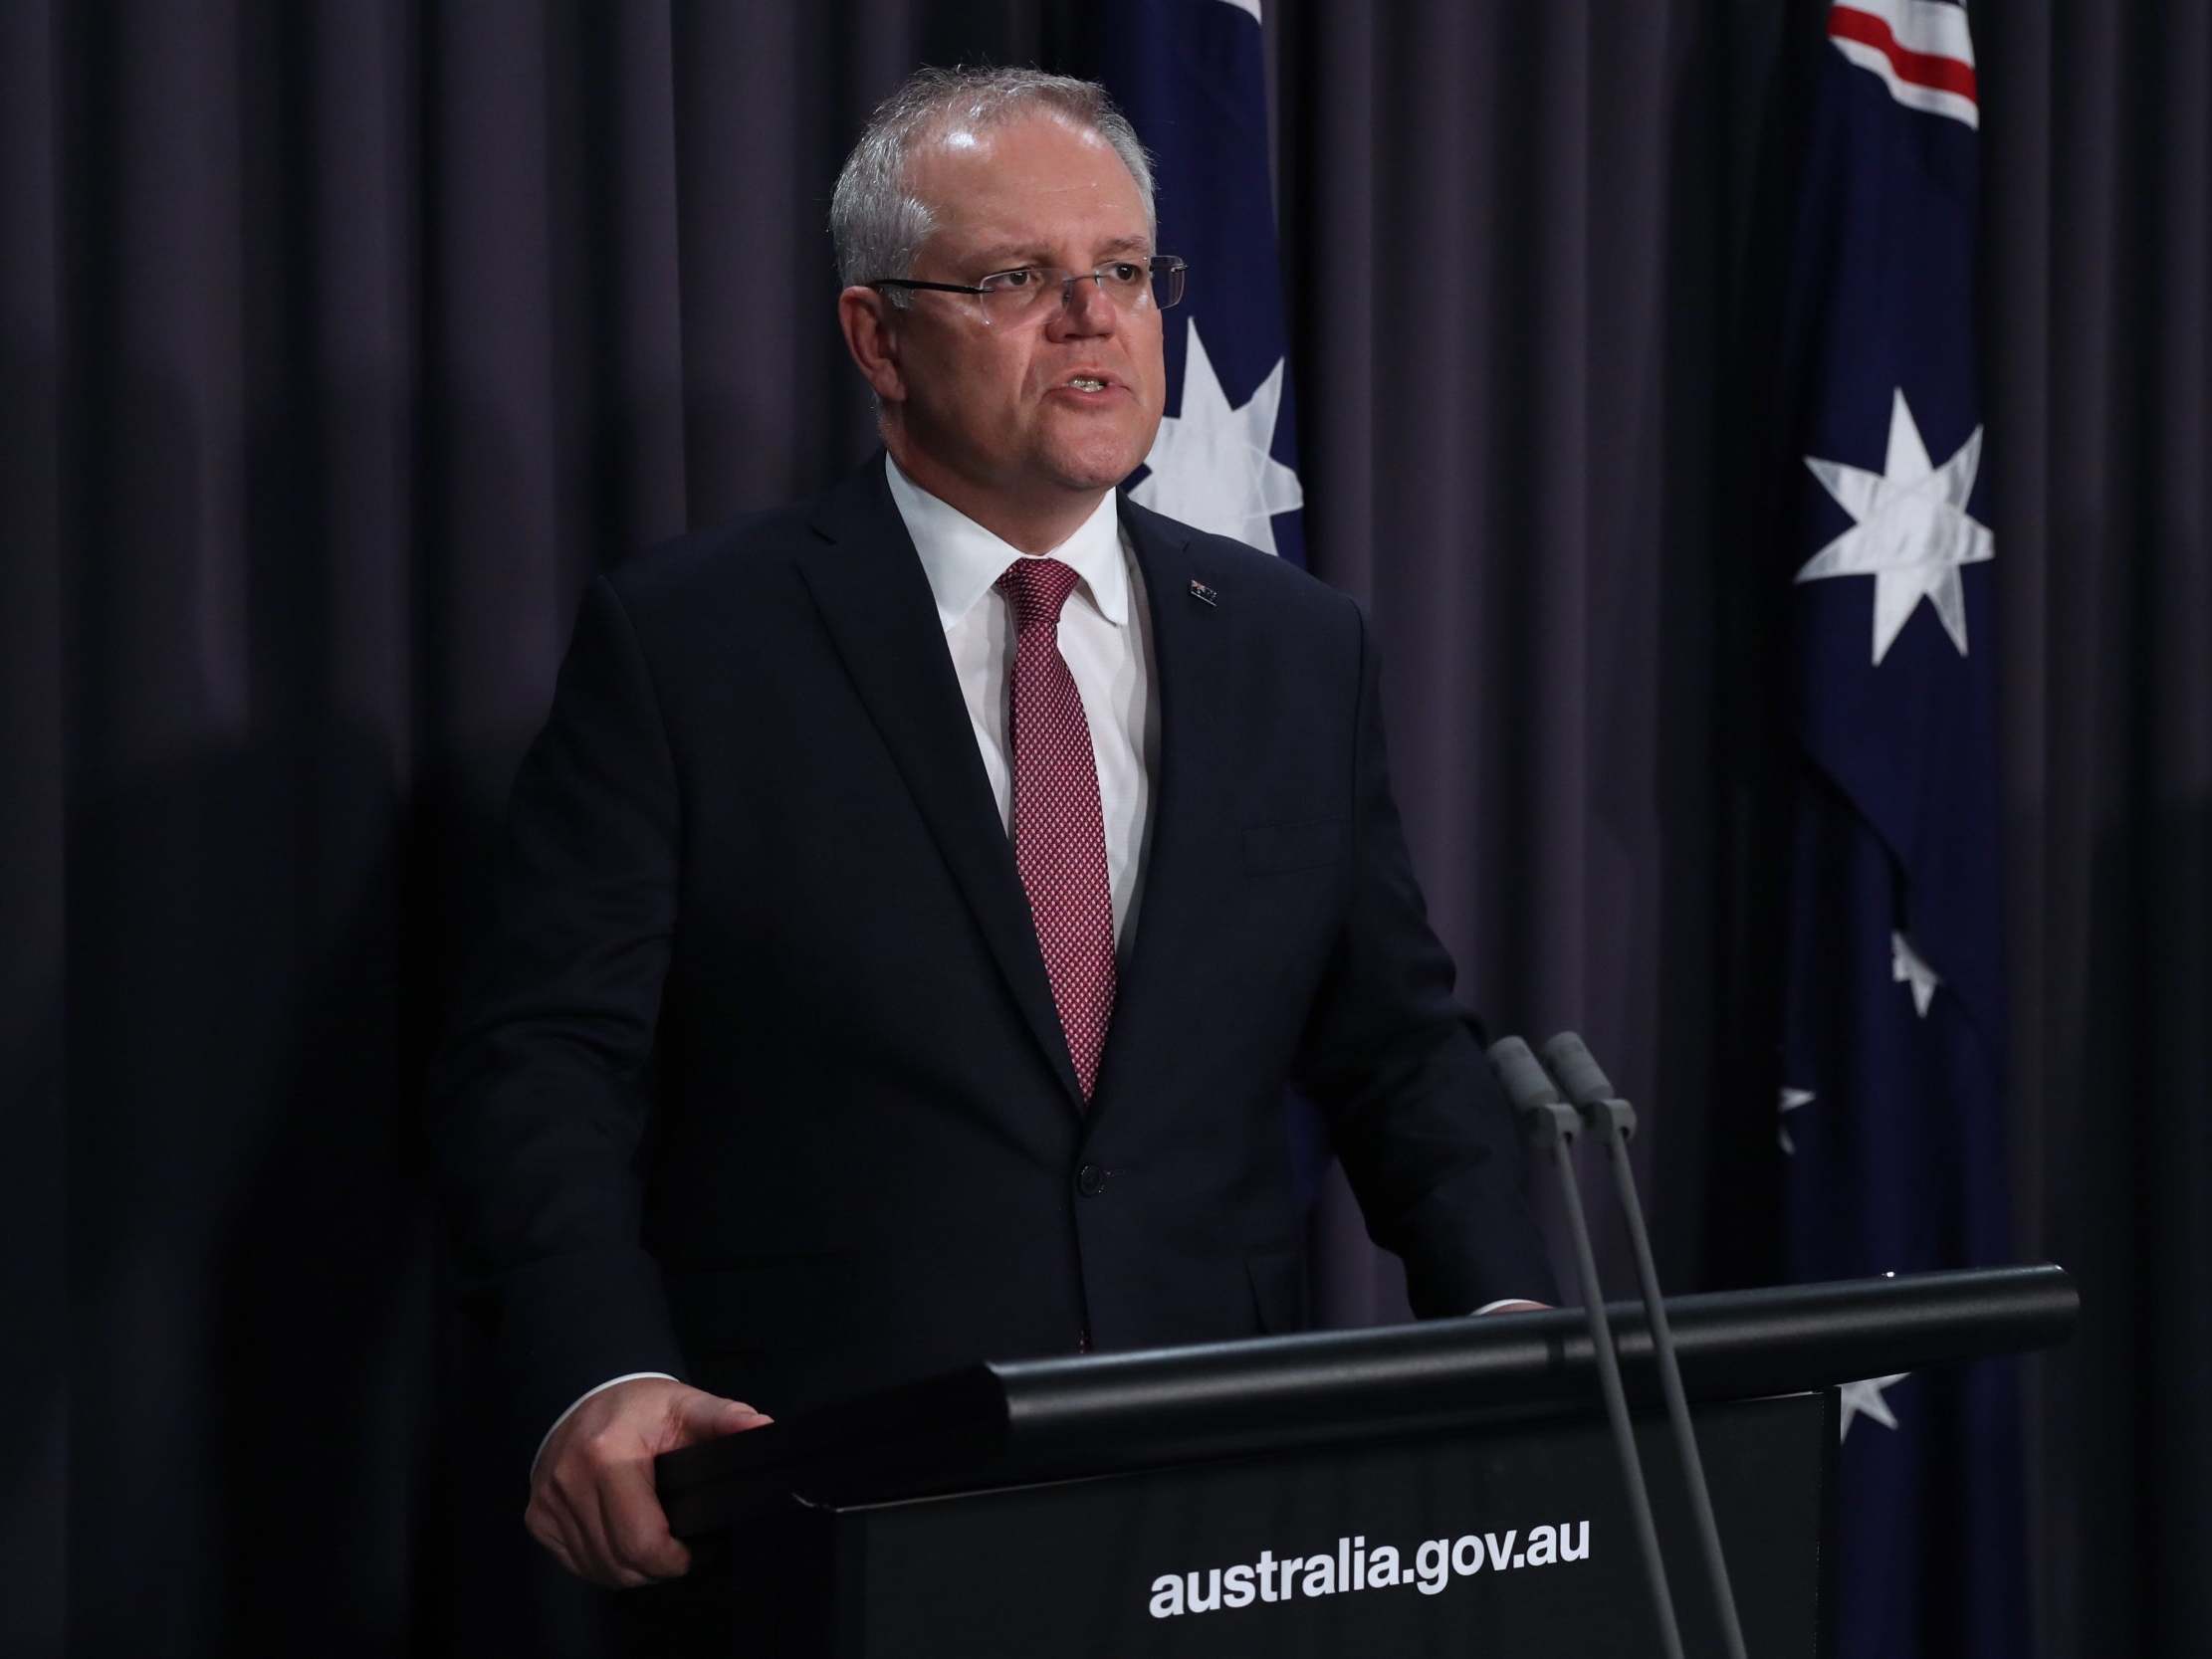 Australian Prime Minister Scott Morrison holds a press conference with Chief Medical Officer Murphy to update the public on the latest coronavirus measures